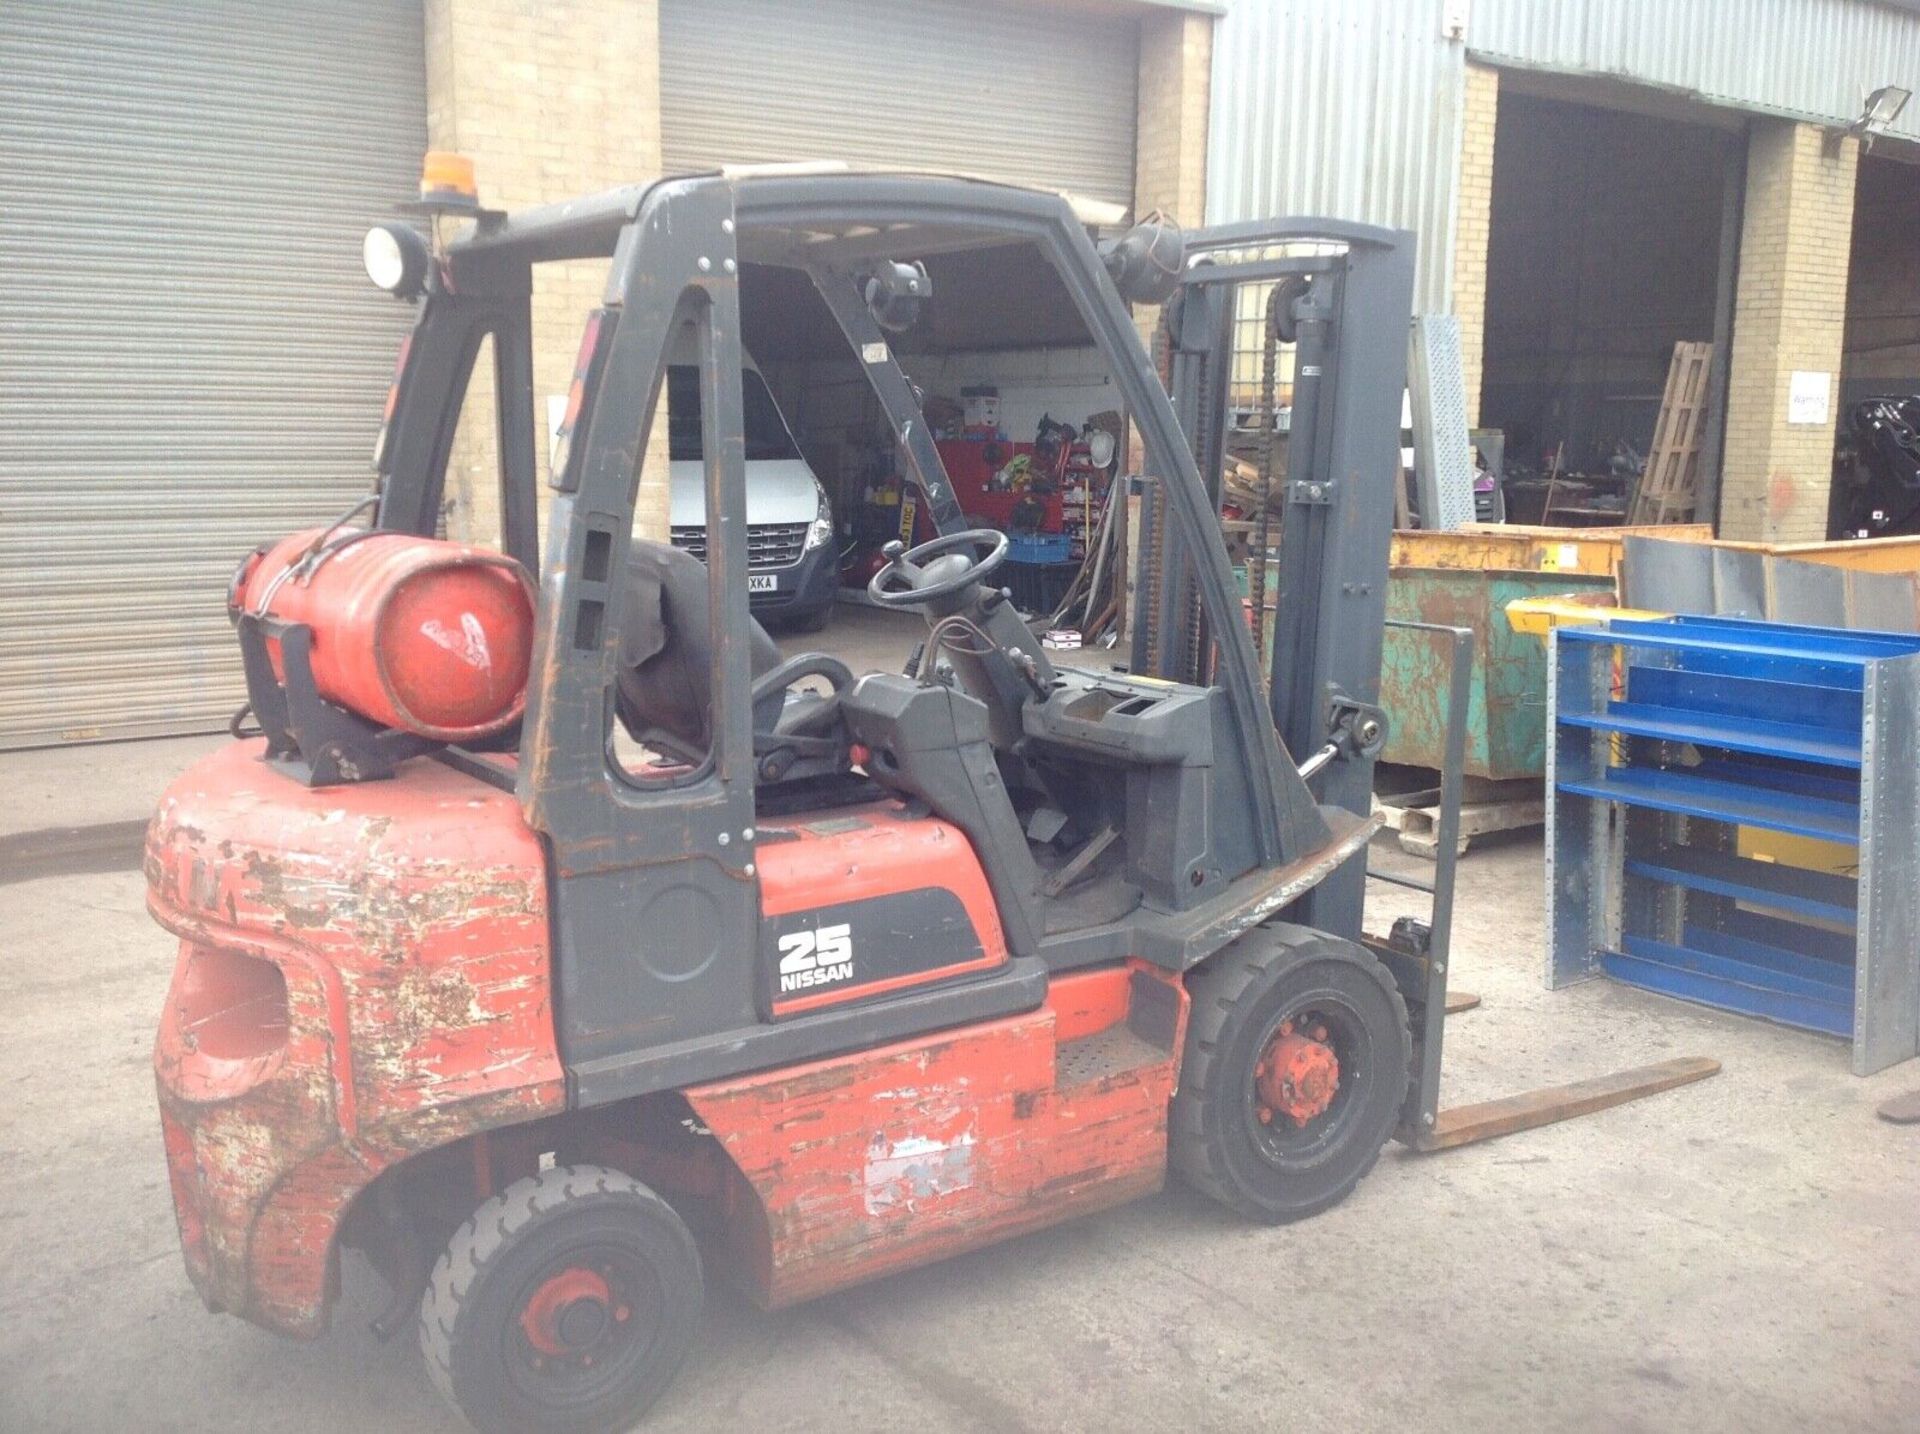 Nissan 2.5 ton gas forklift - Image 3 of 6